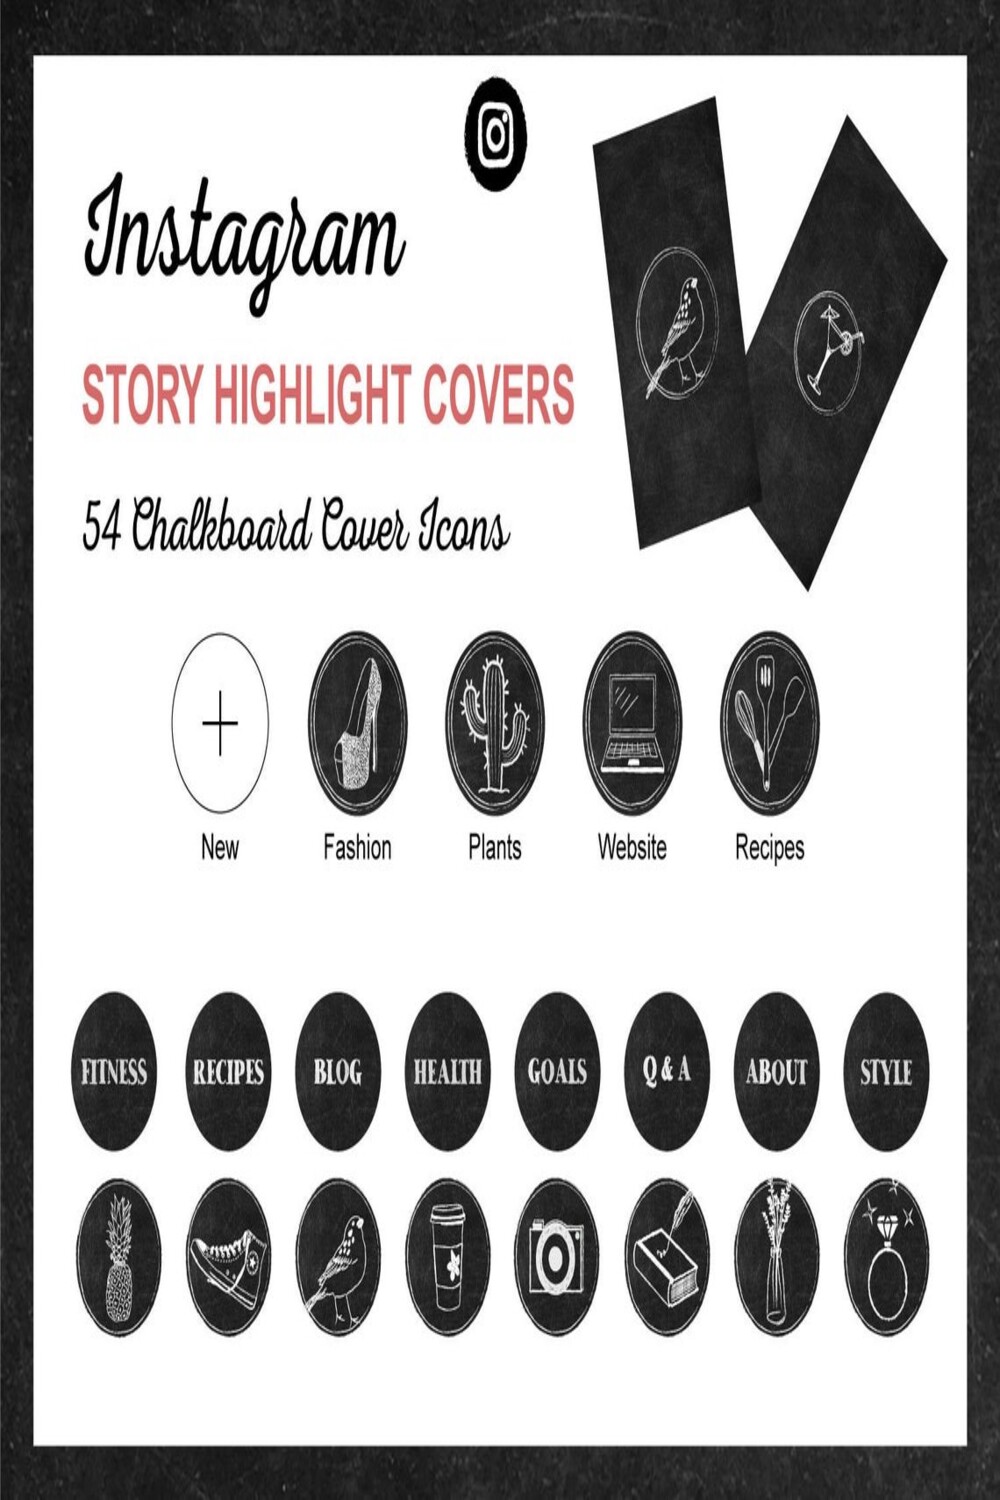 Instagram Story Highlight Covers (54 ChalkBoard Cover Icons) pinterest image.